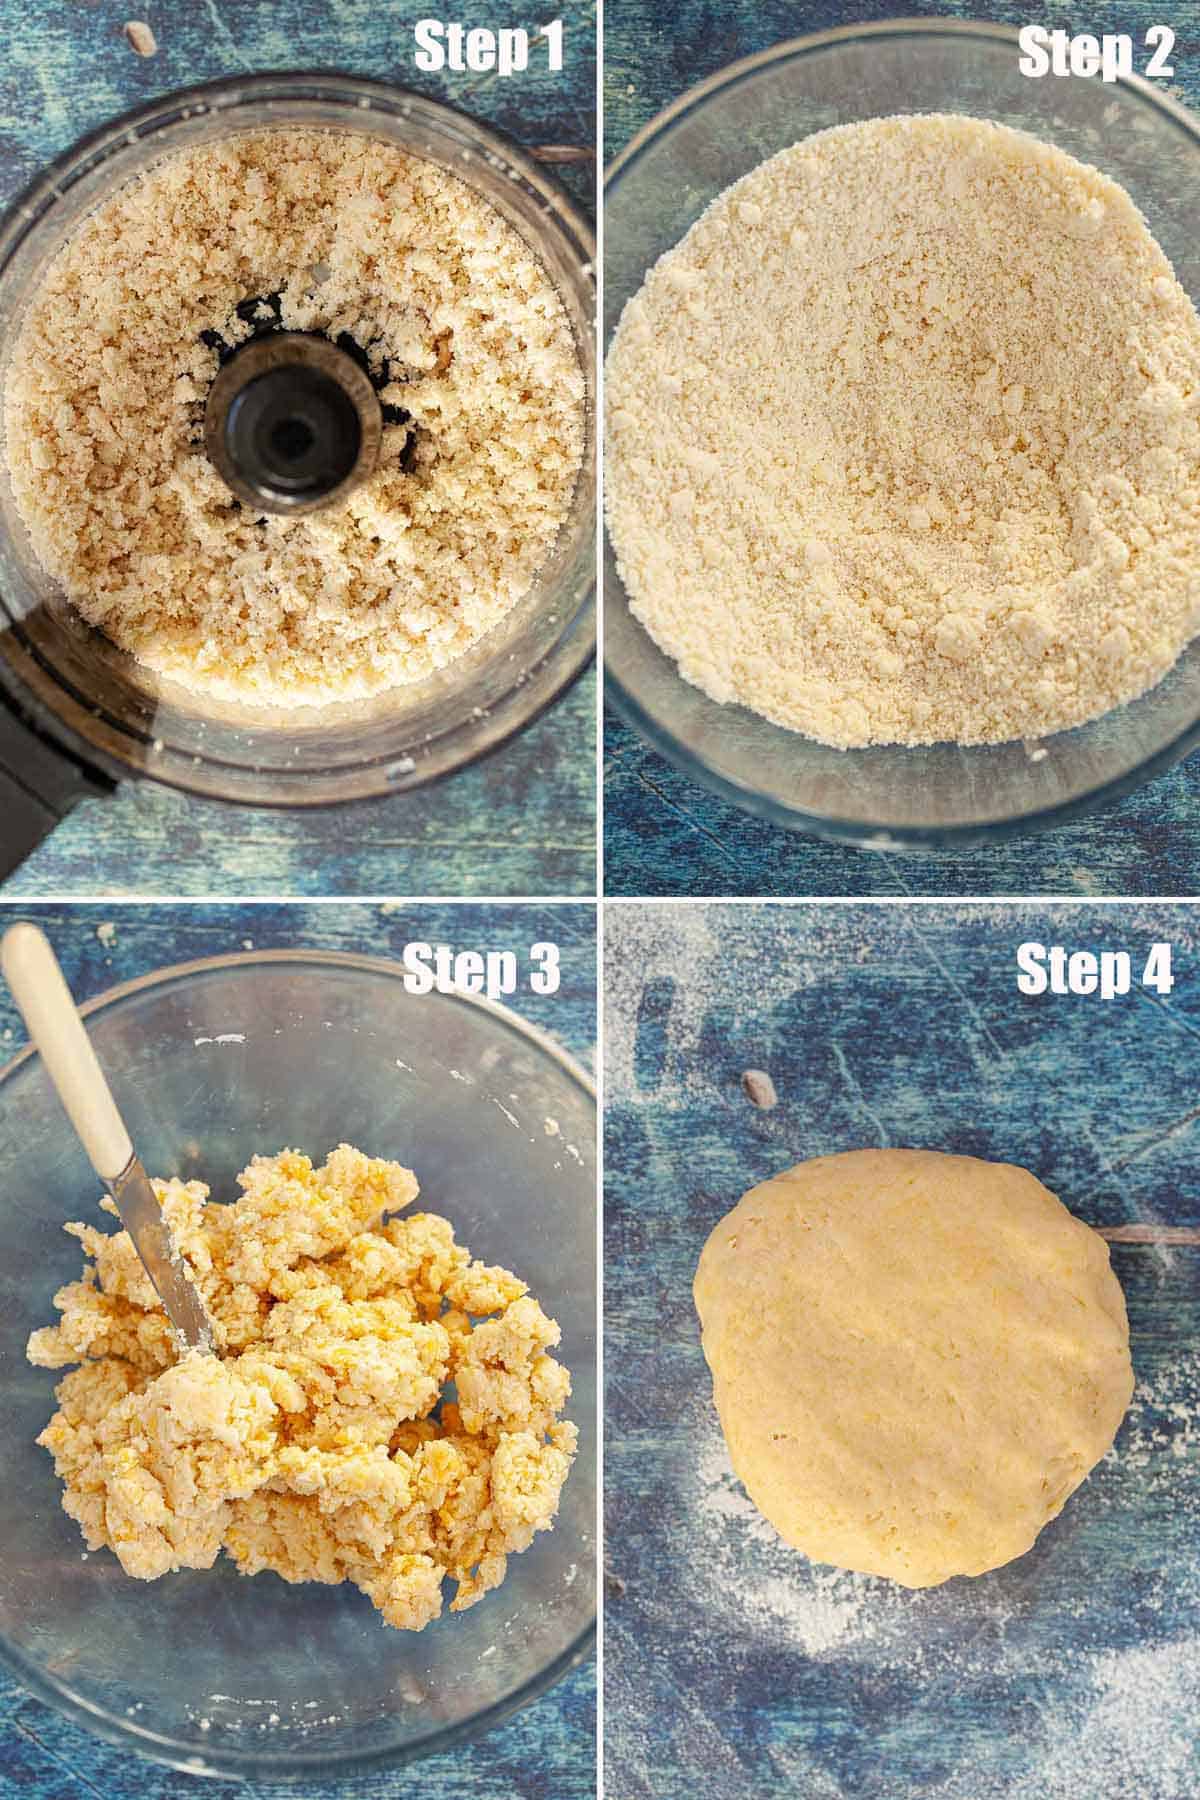 Collage of images showing breadcrumbs and pastry being made.